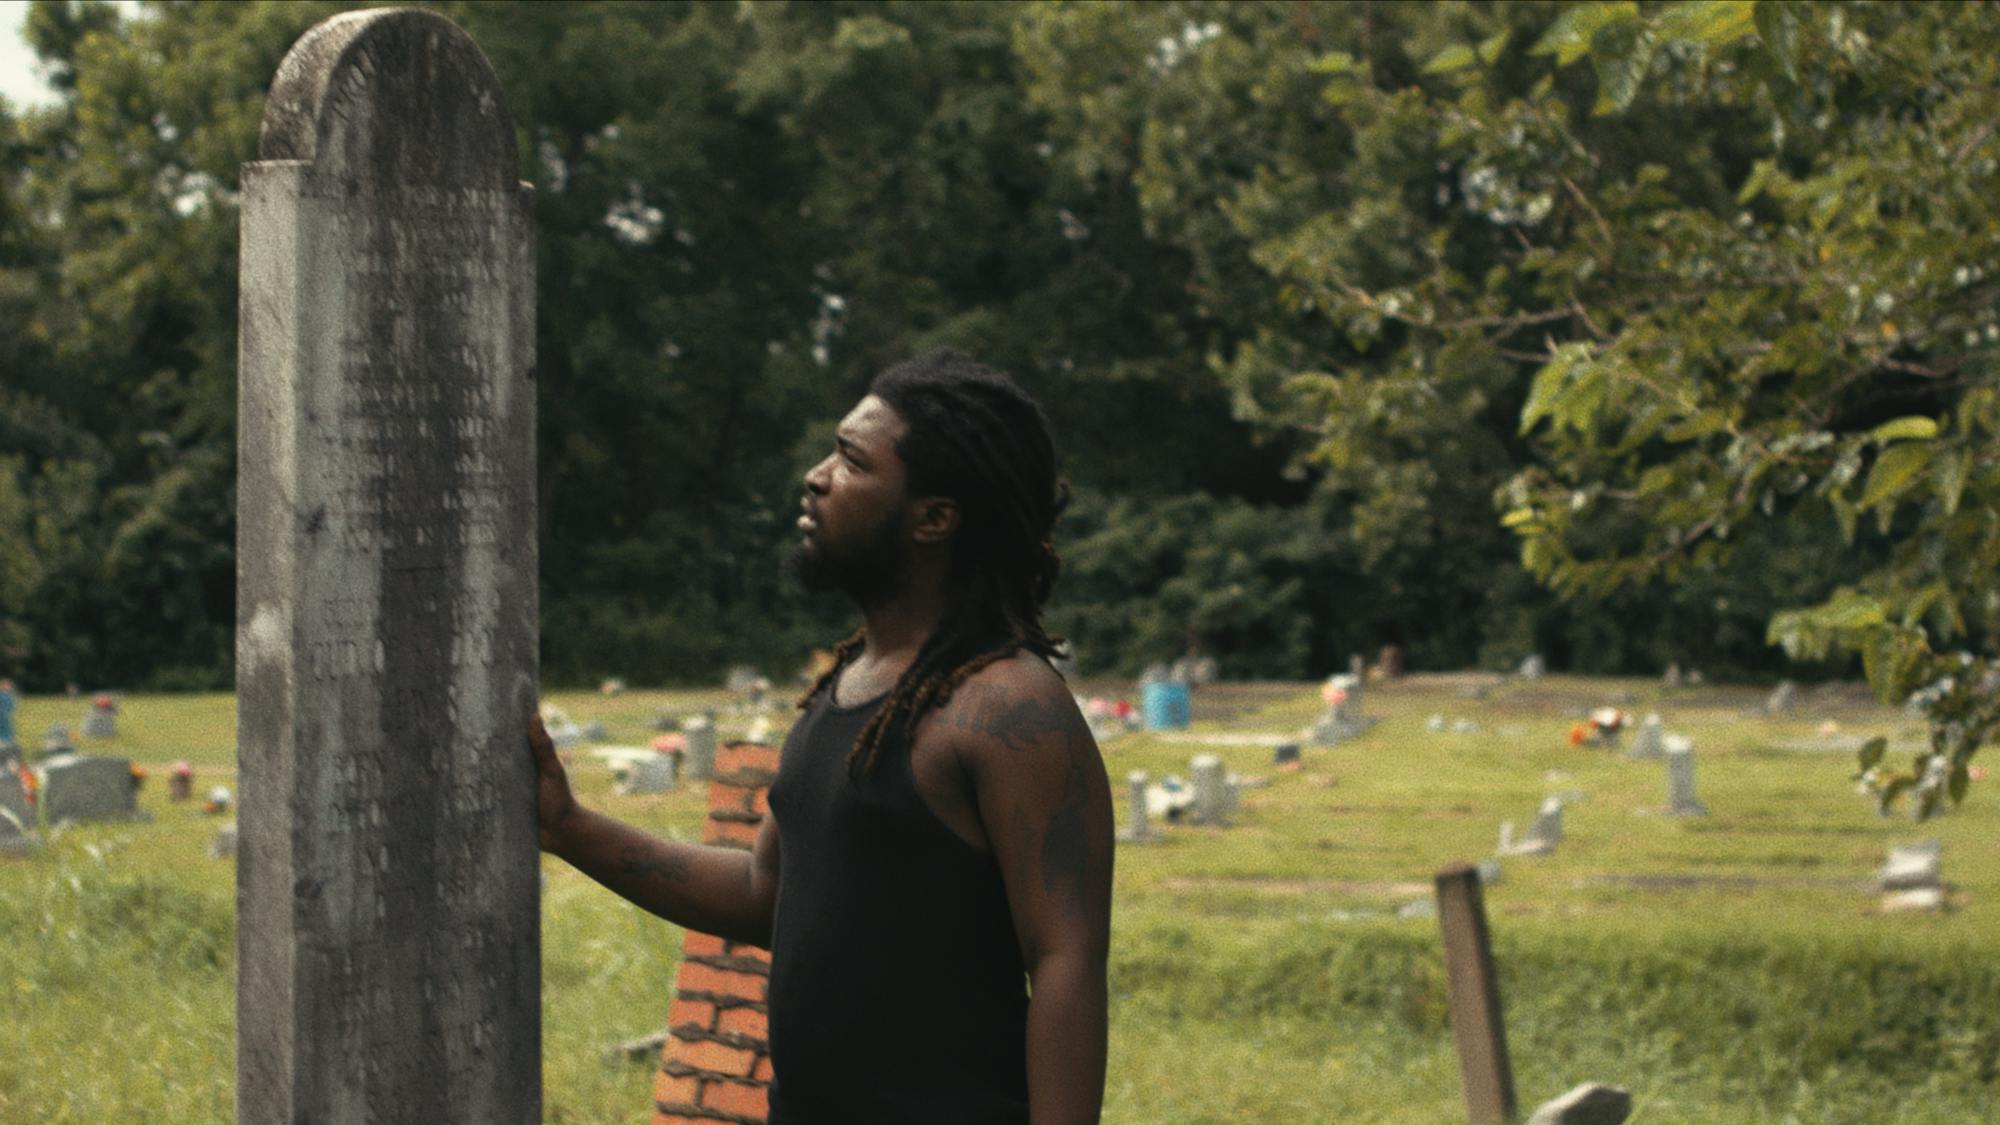 Emmett Lewis wears a black tank top and stands next to a worn-down gravestone in a grassy graveyard.